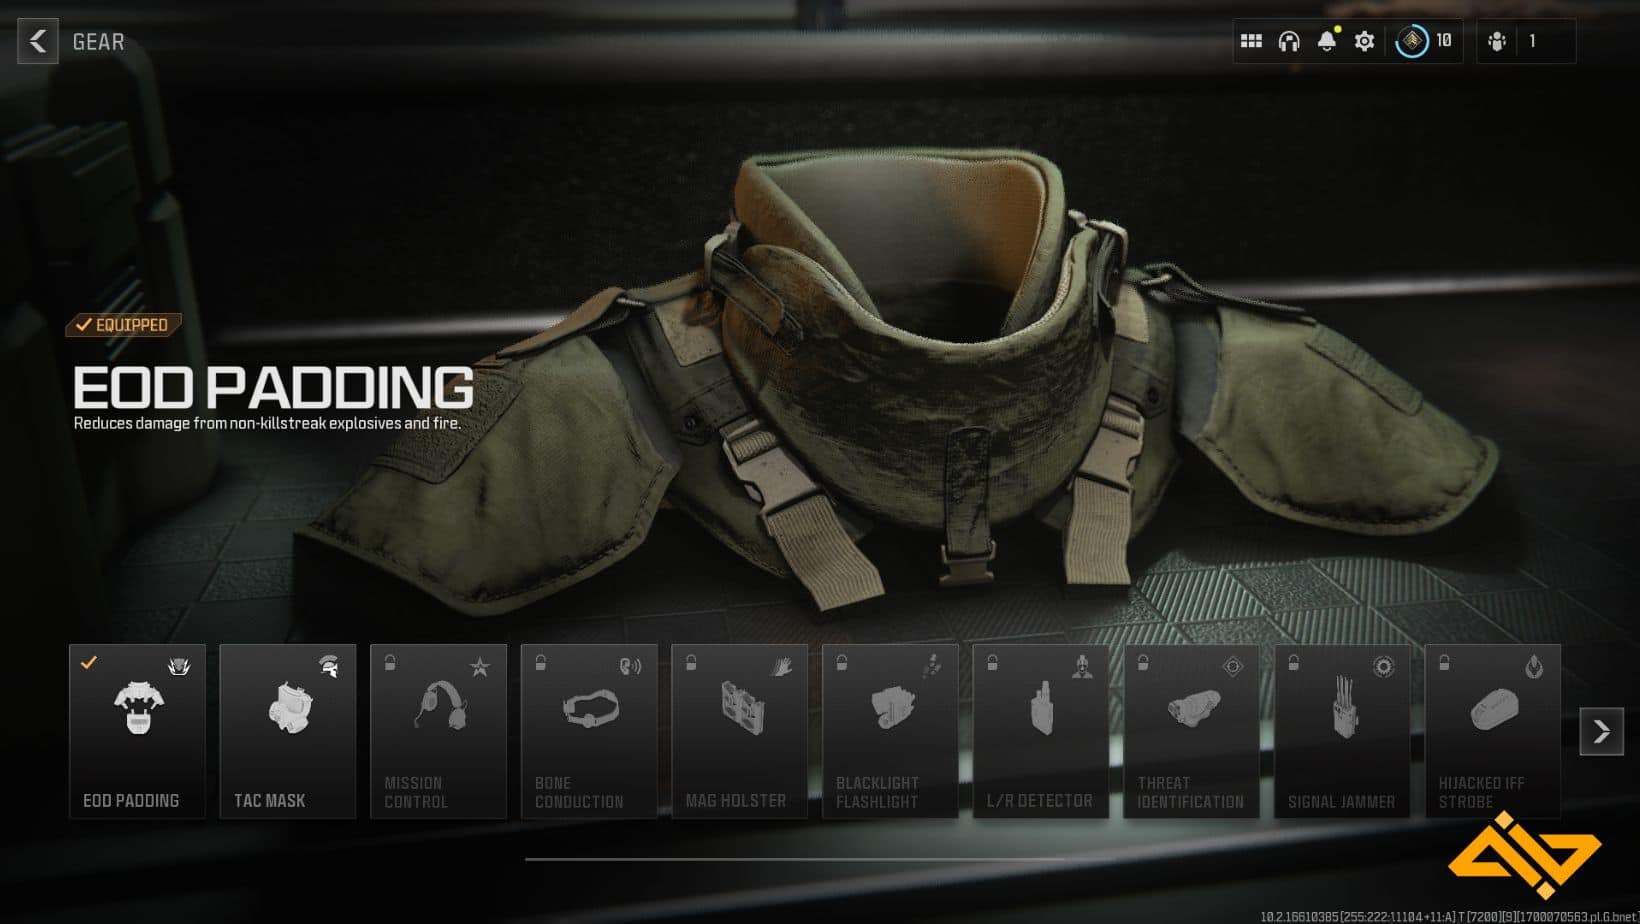 The EOD Padding reduced damage from non-killstreak explosives and fire.